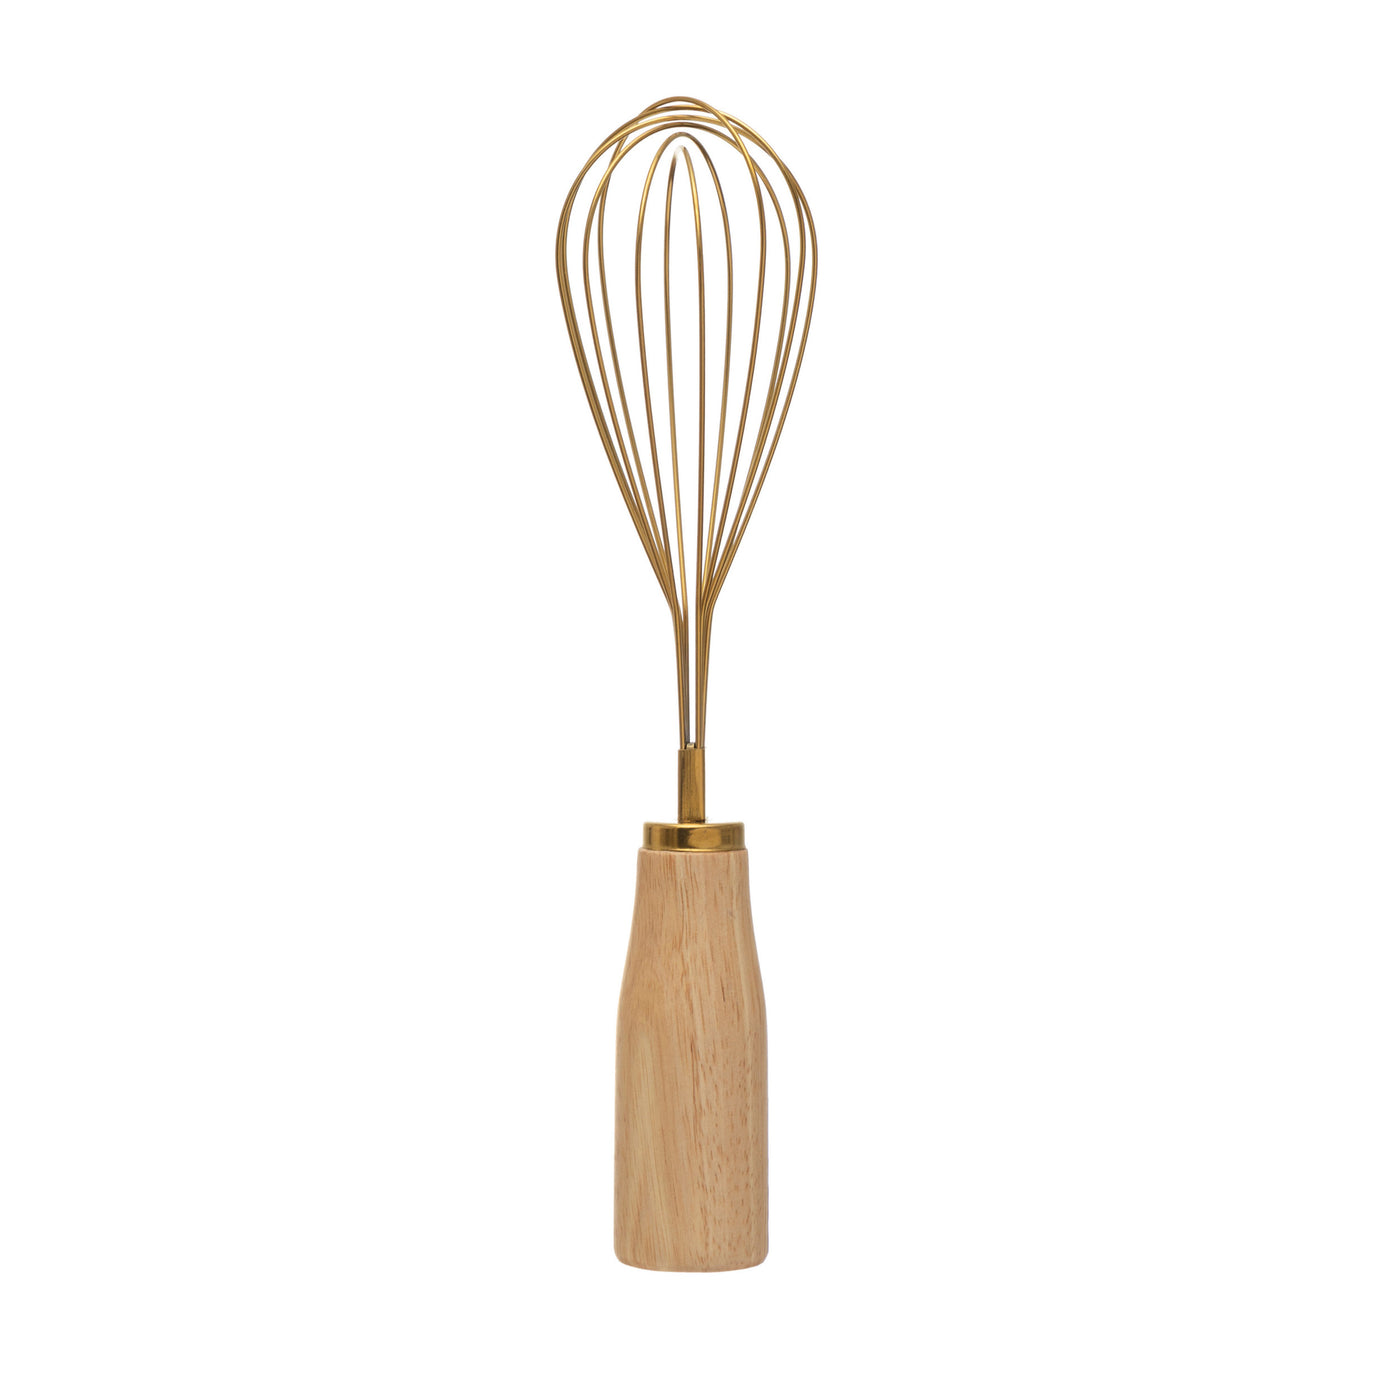 Stainless Steel Whisk with Wood Handle, Gold